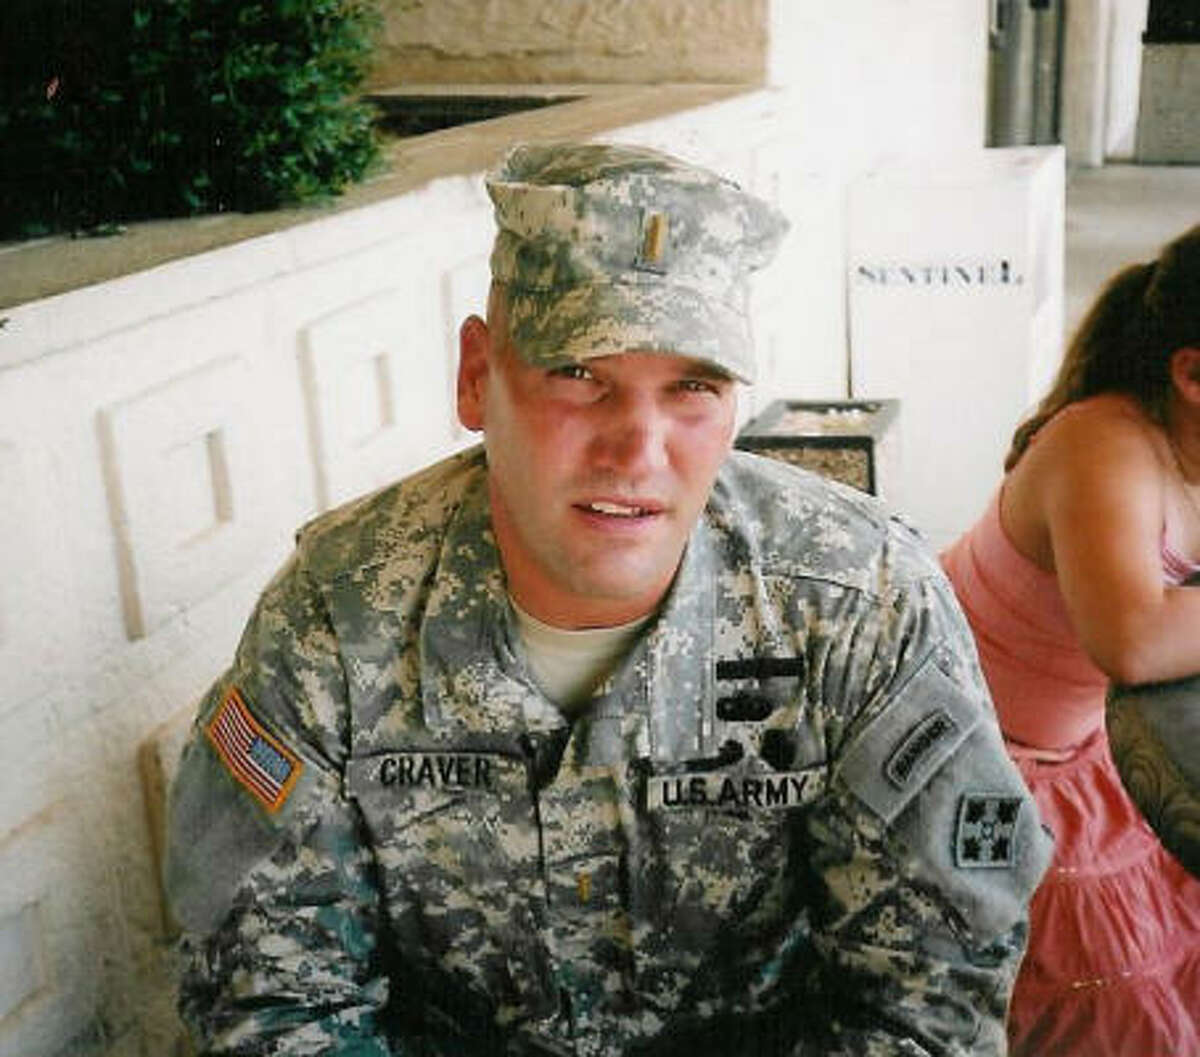 Army 2nd Lt. Johnny Craver, 37, of McKinney, was killed in October when an improvised explosive device detonated near his vehicle. He was one of 59 Texas soldiers killed in Iraq this year.